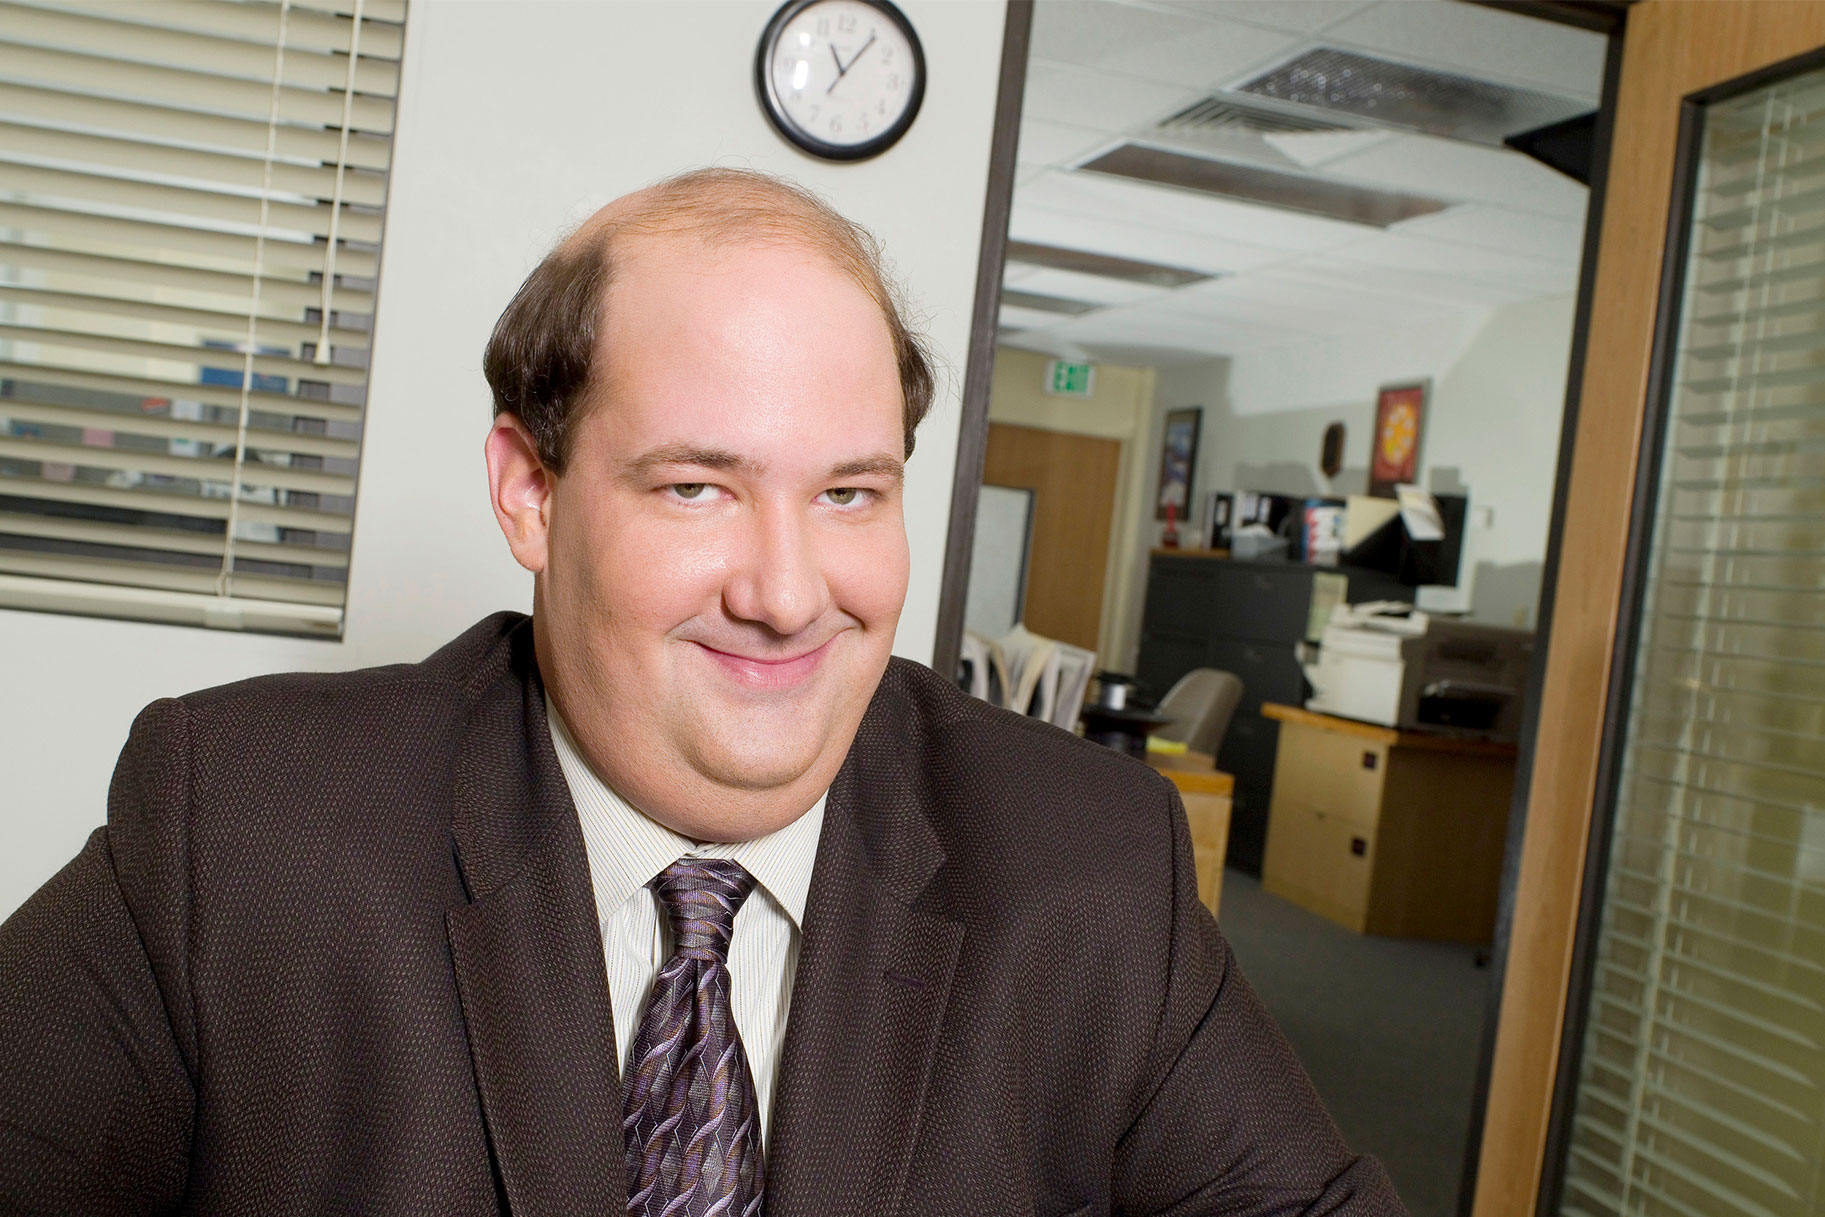 The Office's Kevin